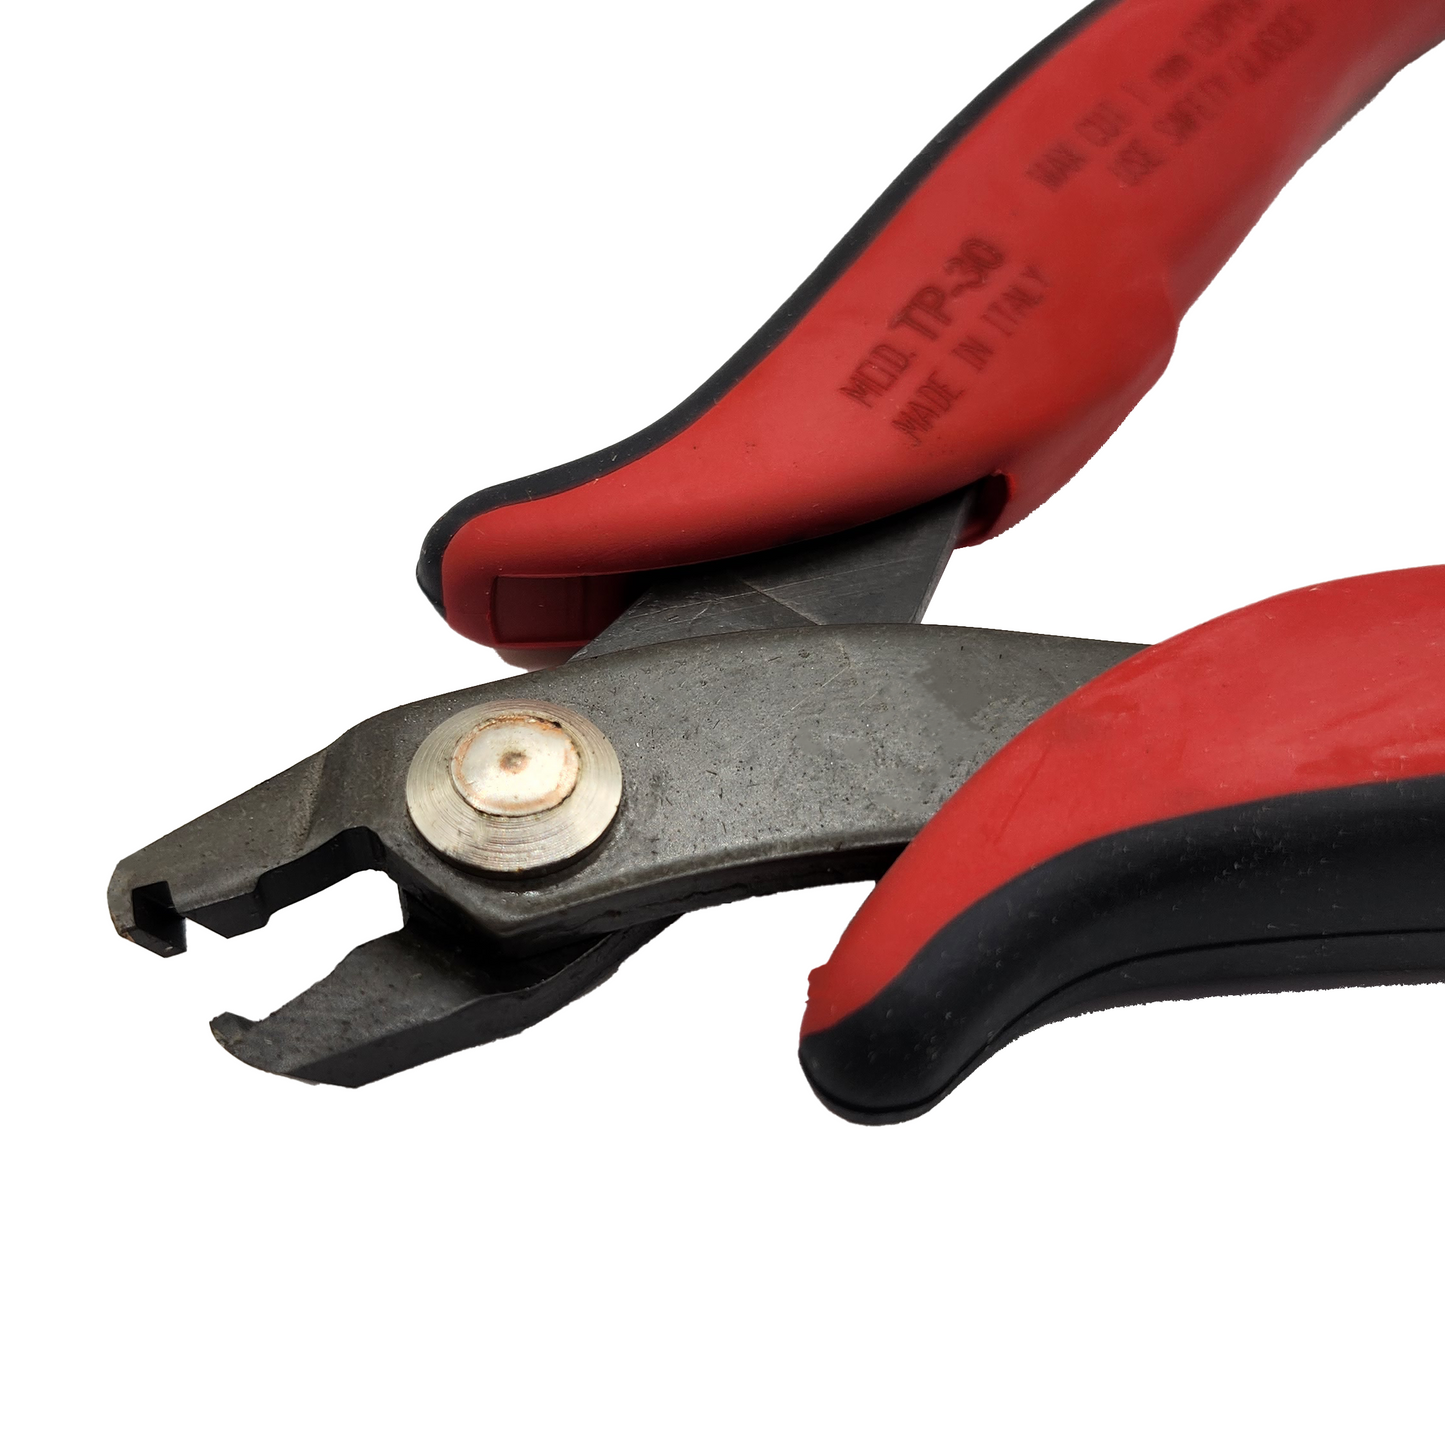 CHP_ CHP TP-30 Lead Forming Tool_ Cutters, Pliers, Multi-Tools_ Hakko Products